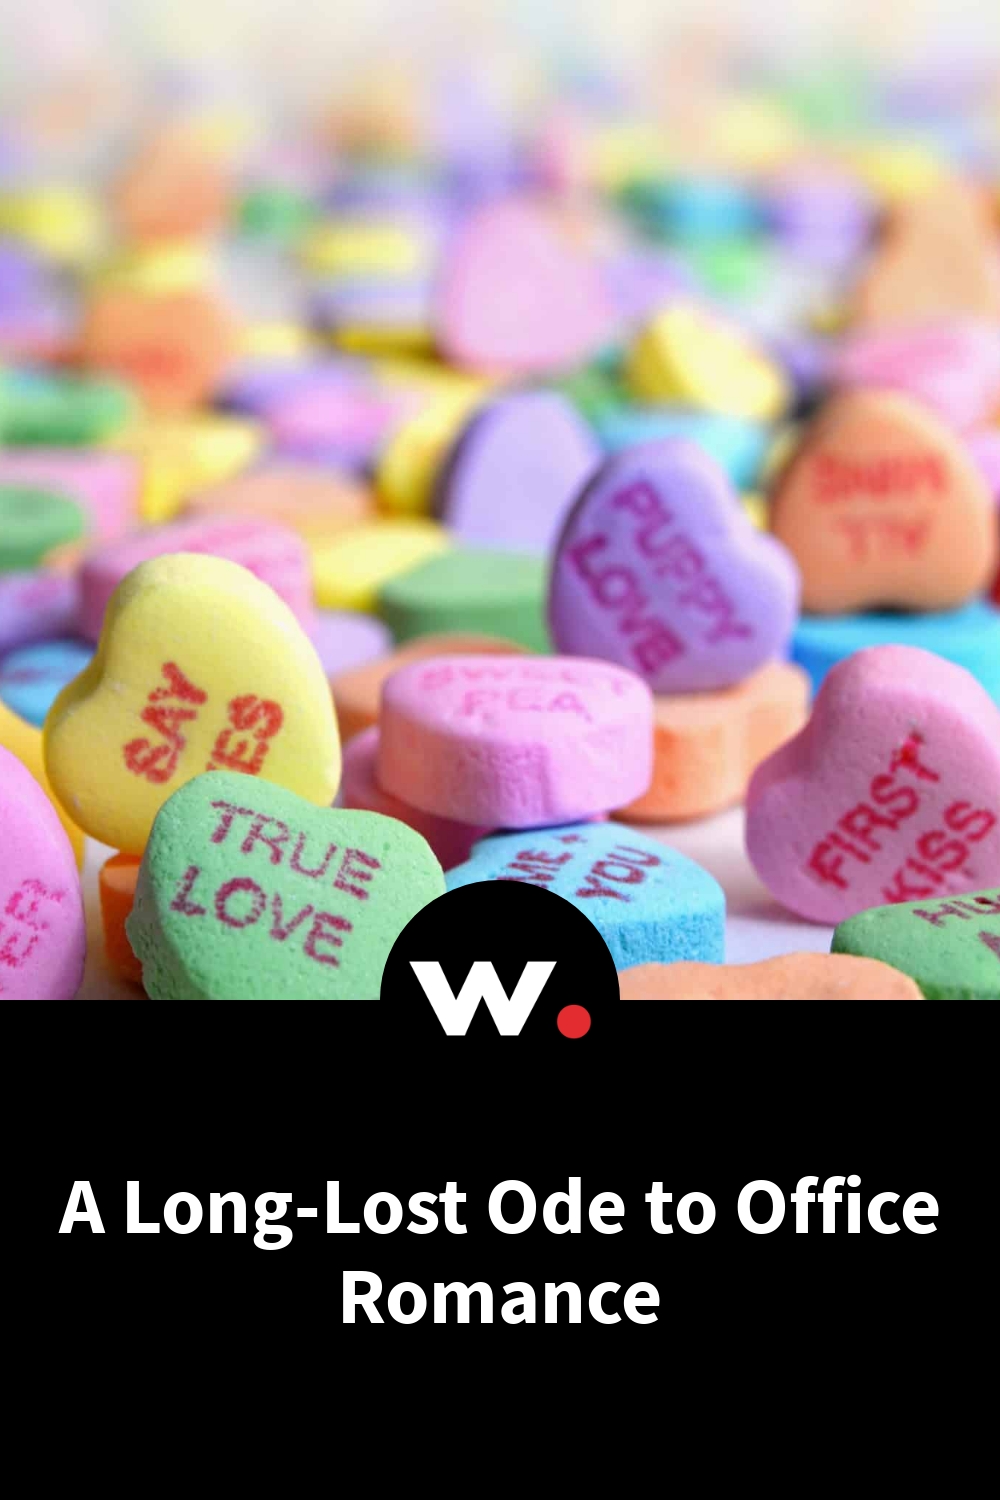 A Long-Lost Ode to Office Romance